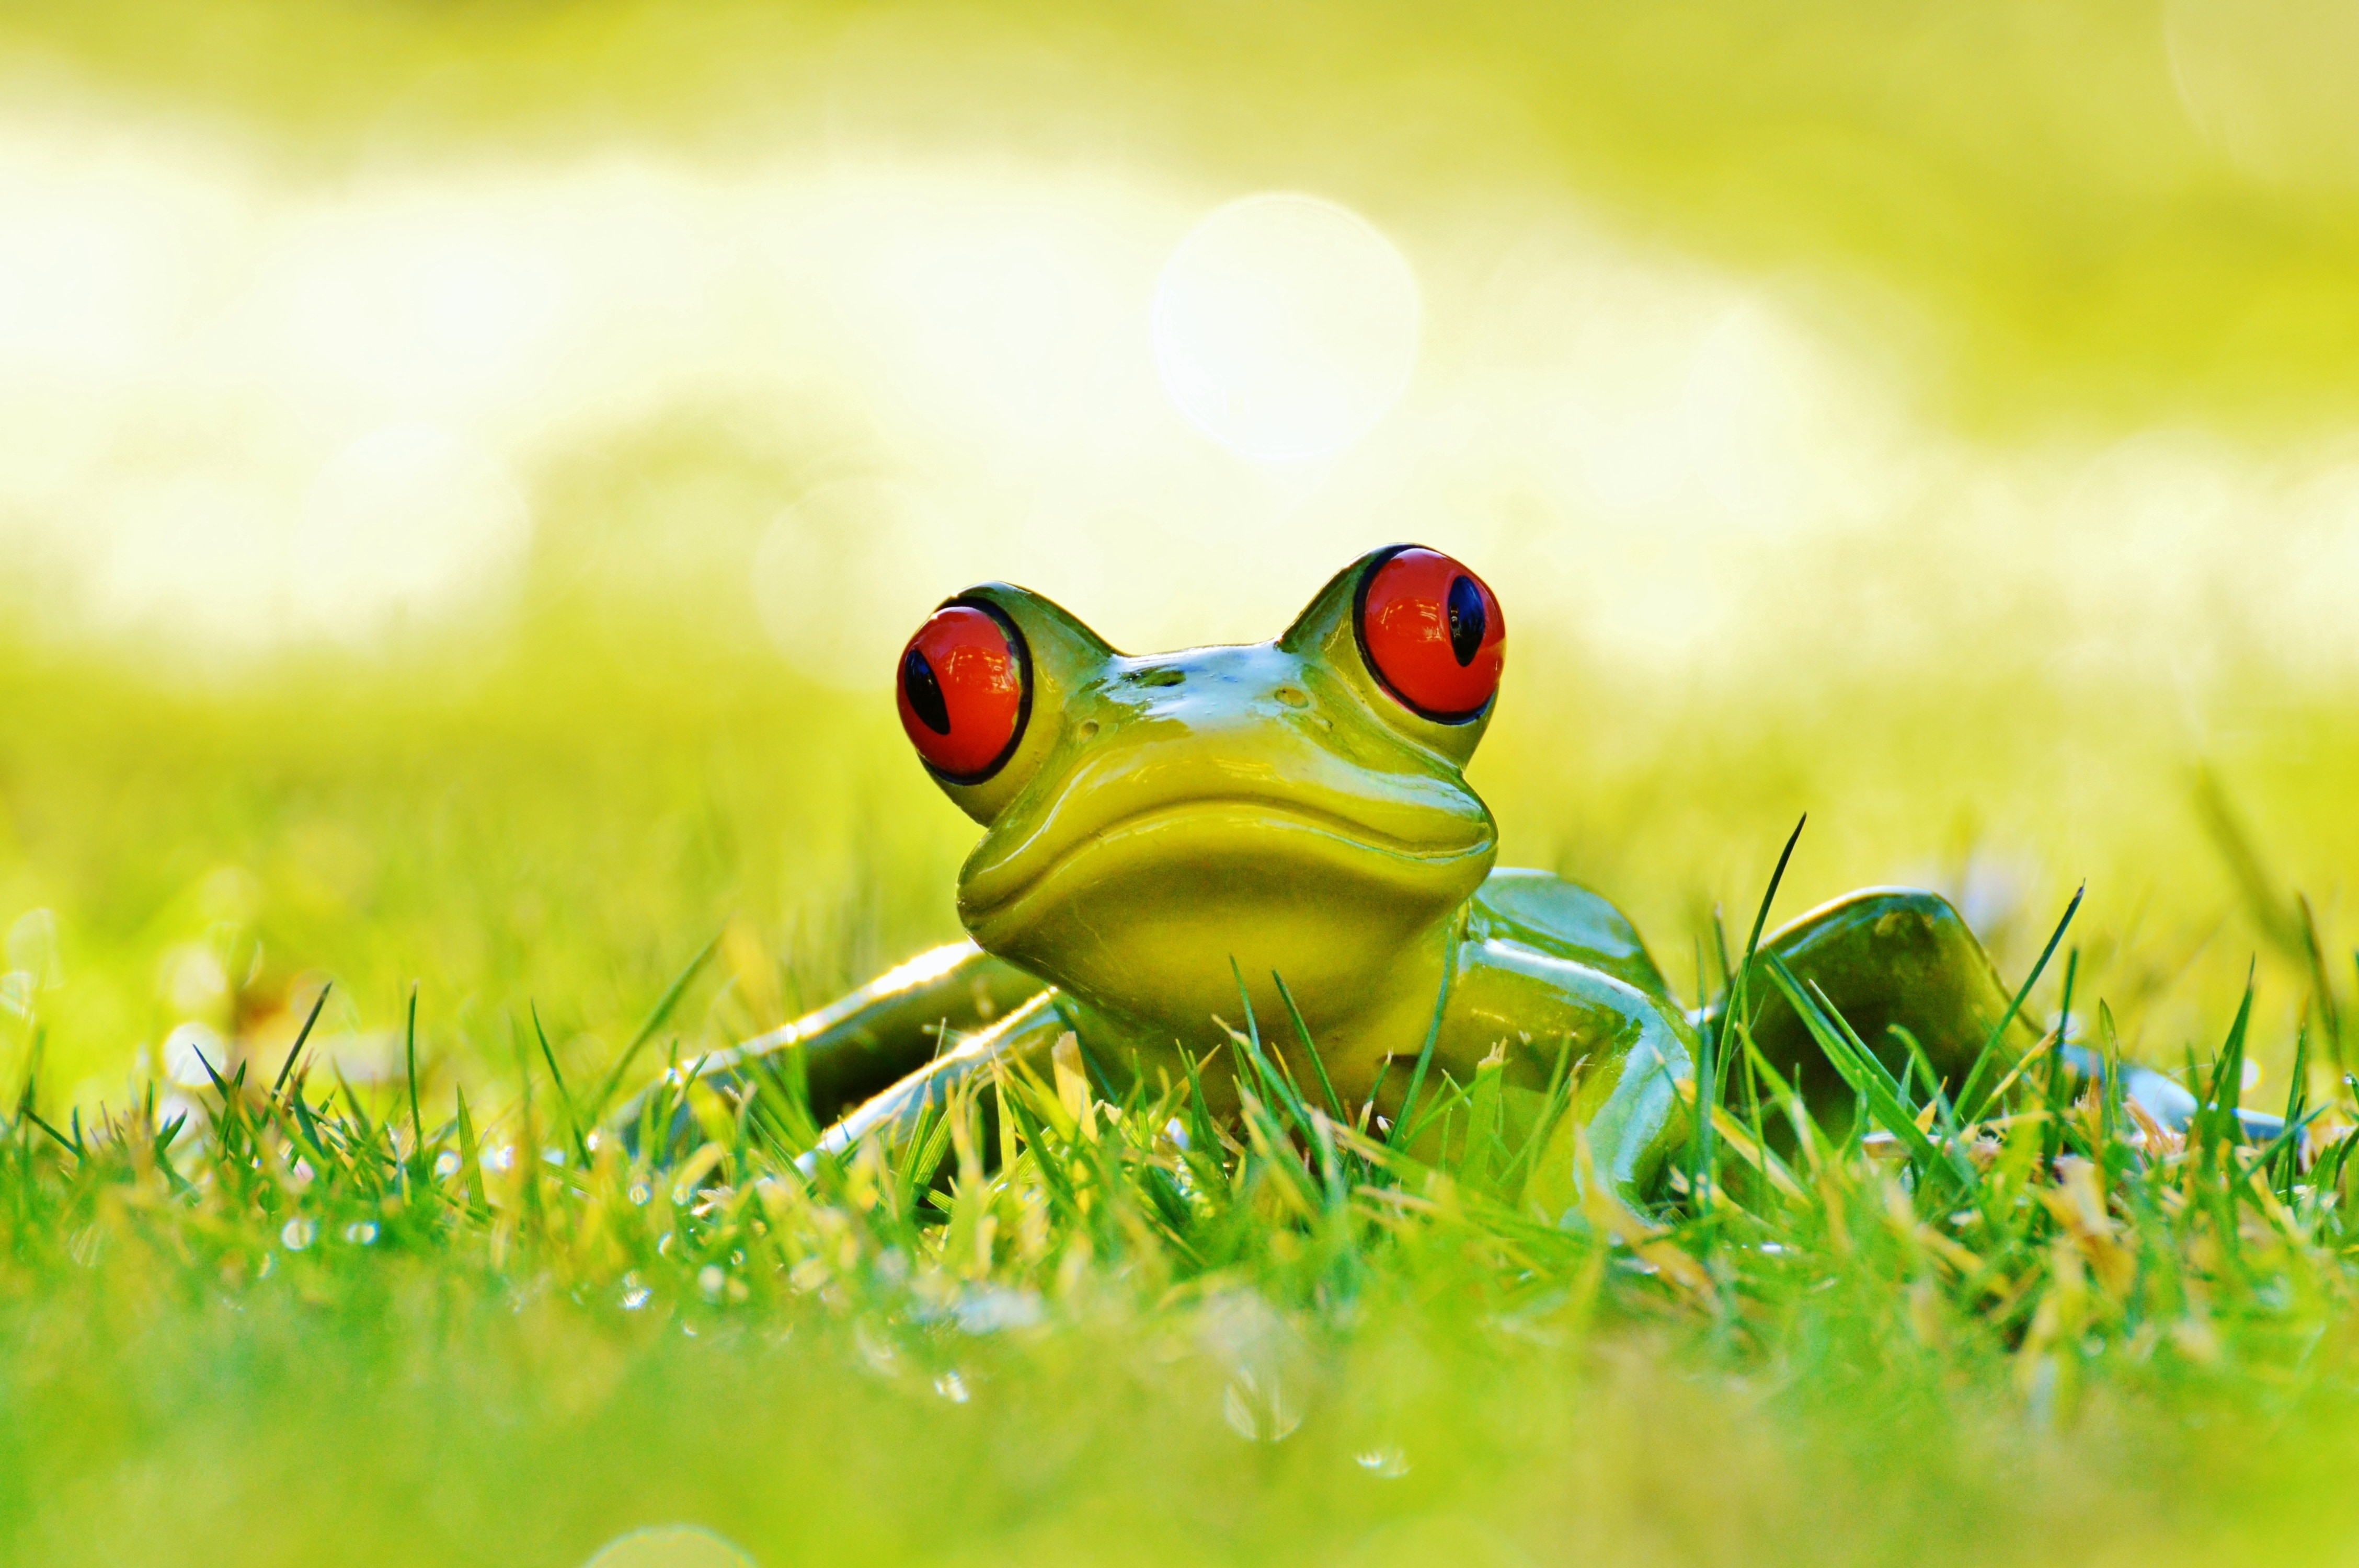 Cute, Meadow, Animal, Green, Fig, Frog, green color, grass